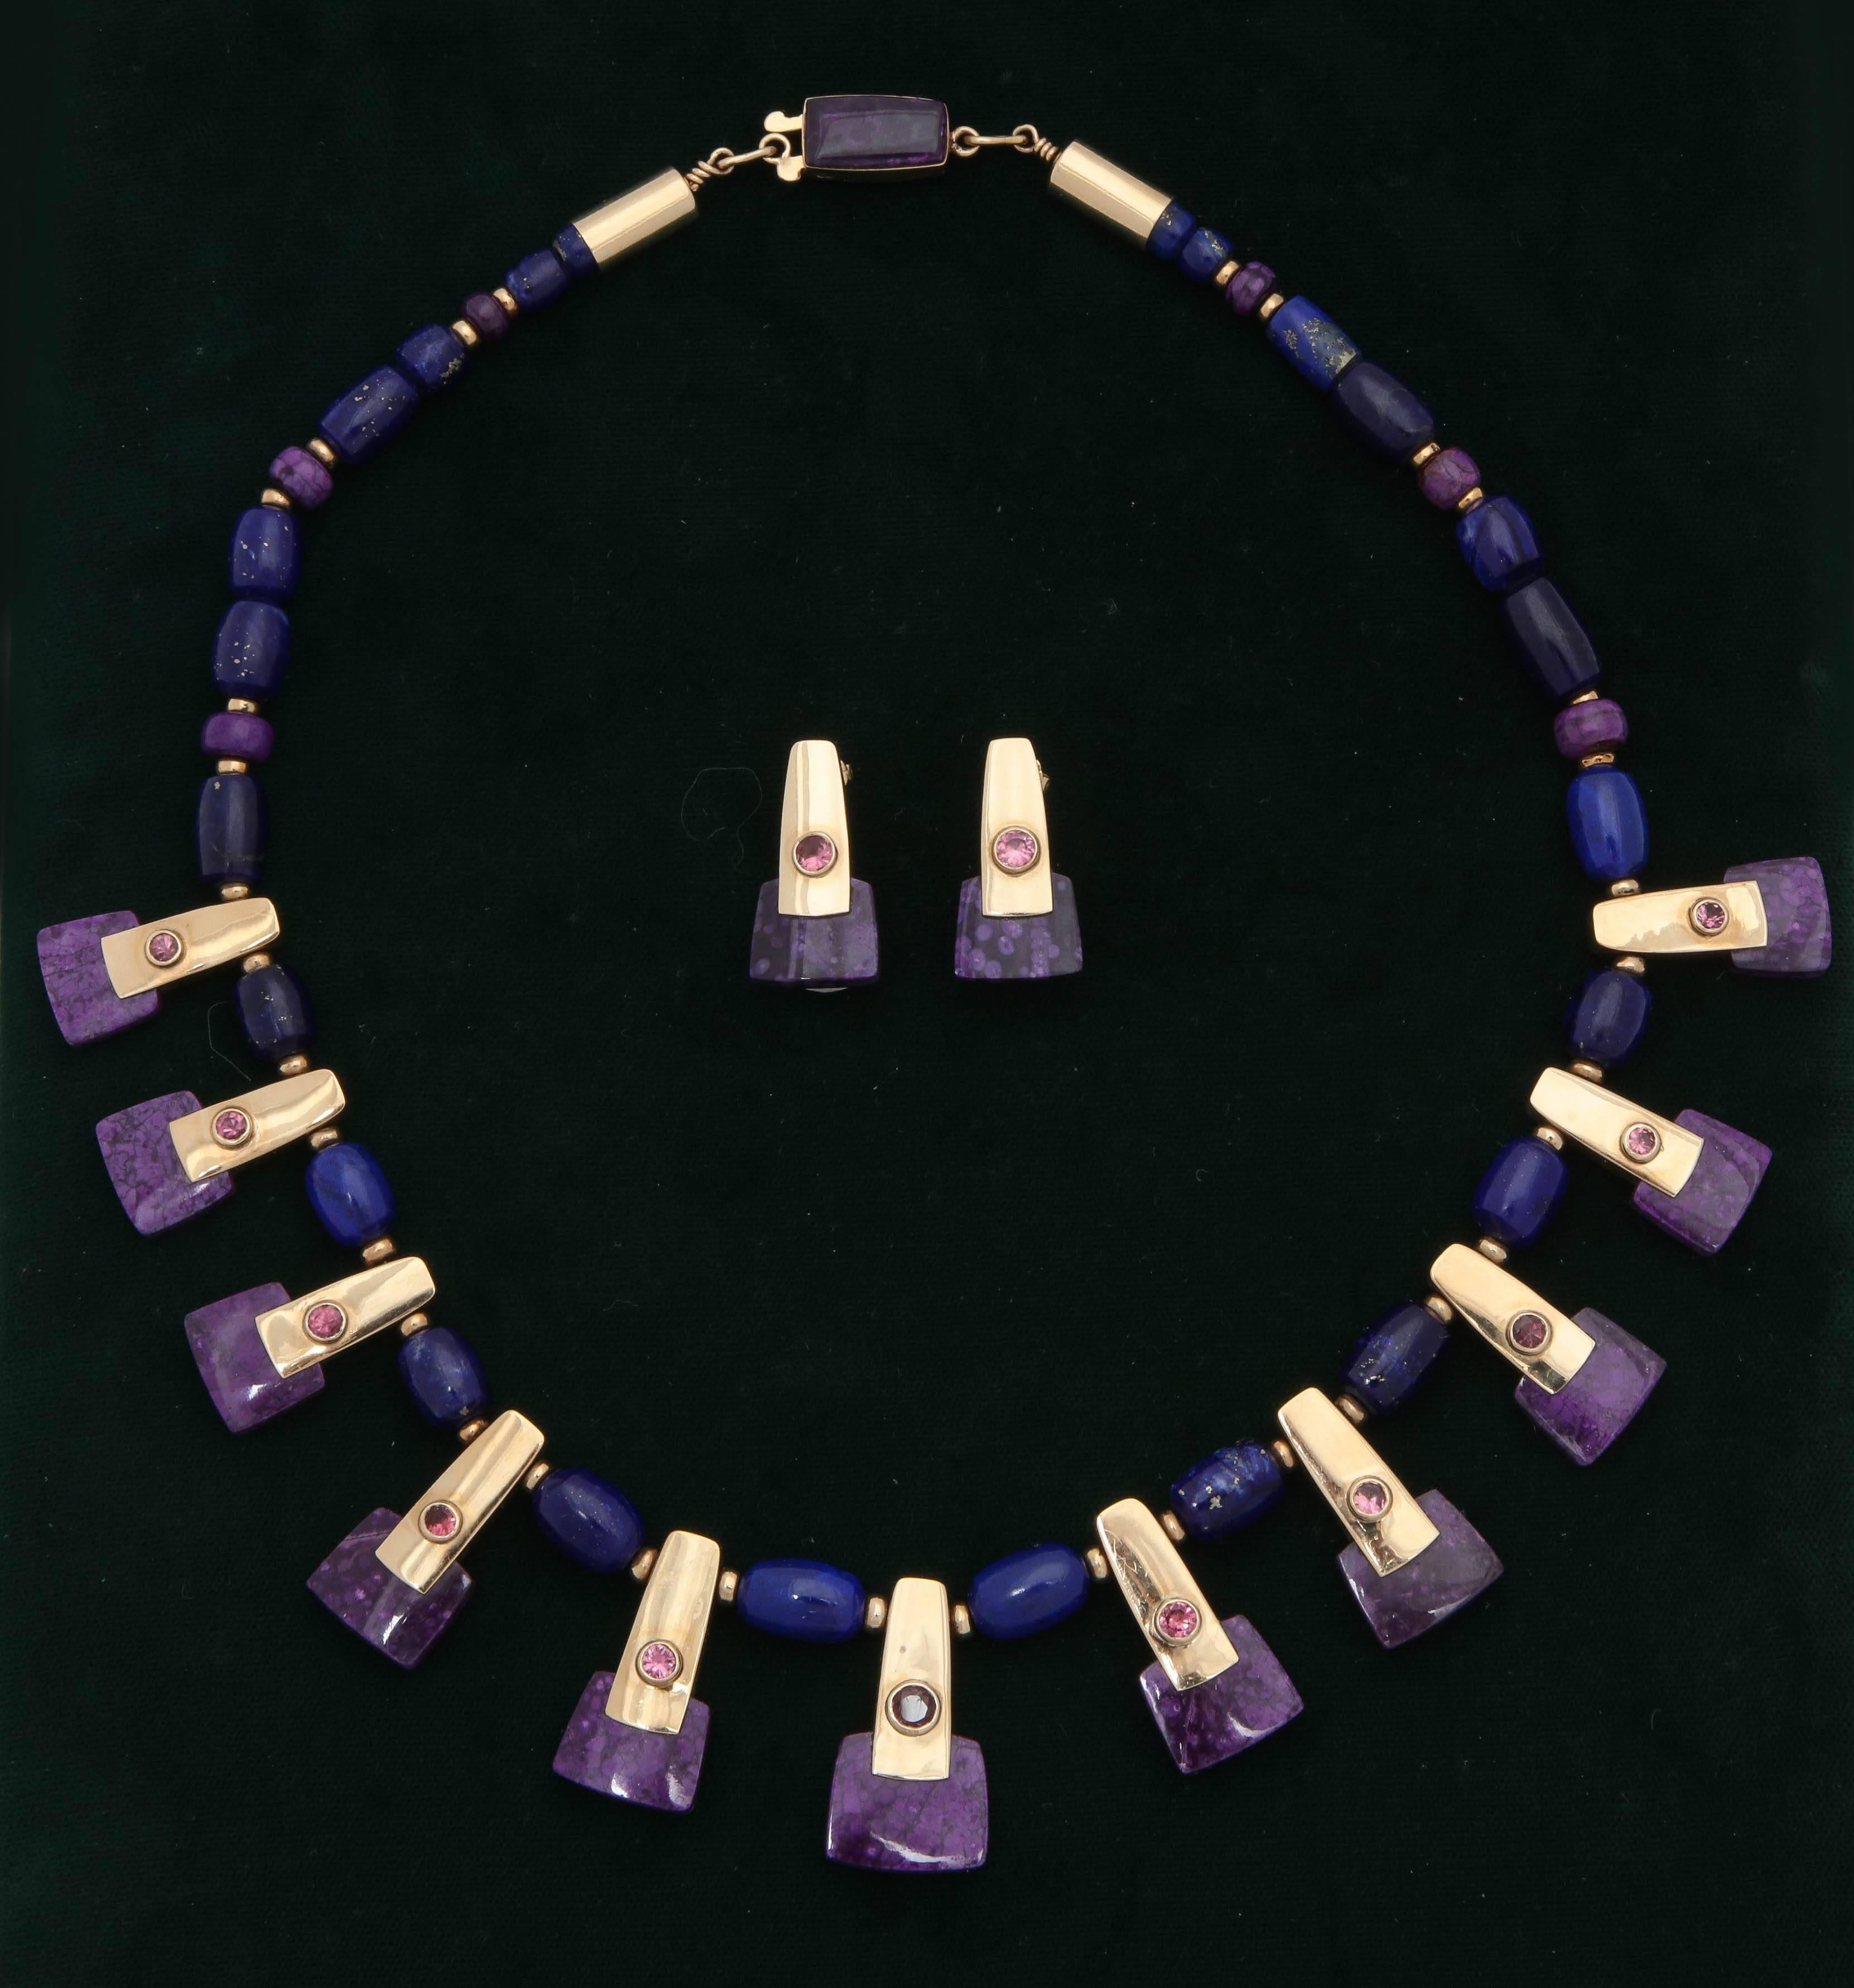 One 14kt Yellow Gold Cleopatra Style Necklace Designed With {12} Rectangular Shaped Custom Cut Purple Sugilite Stones.This Necklace Is Further Embellished with {11} Bezel Set Round Rubelite Stones And Numerous Beautiful Quality Lapis Lazuli Beads.